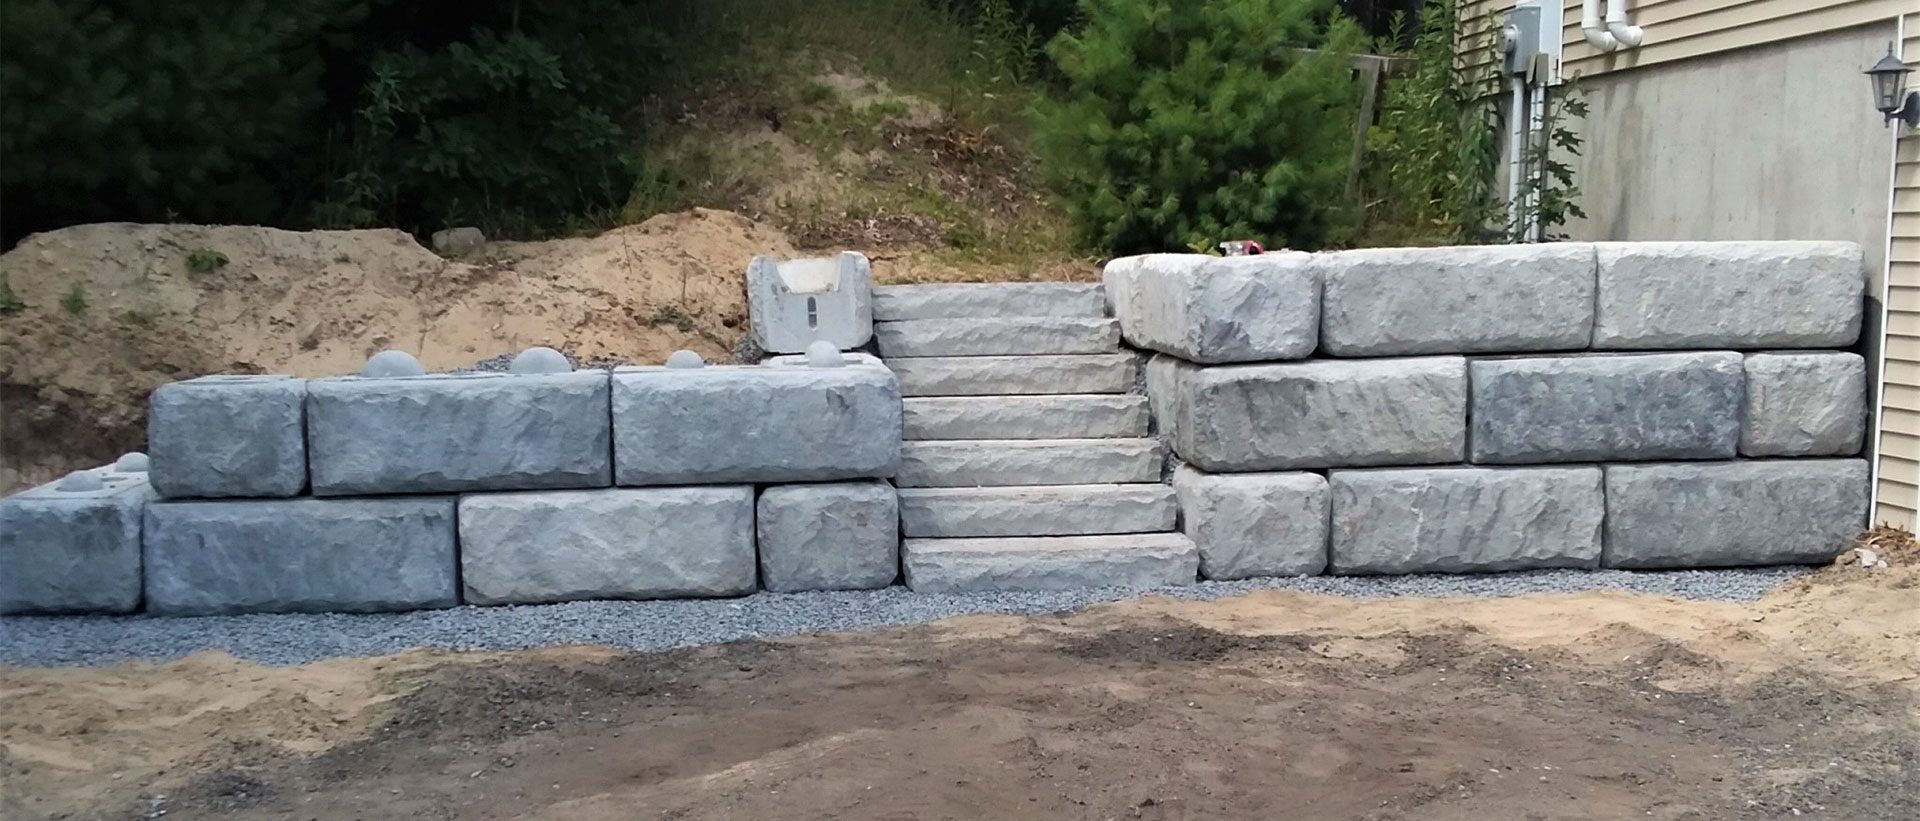 Residential Redi-Rock retaining wall featuring stairs